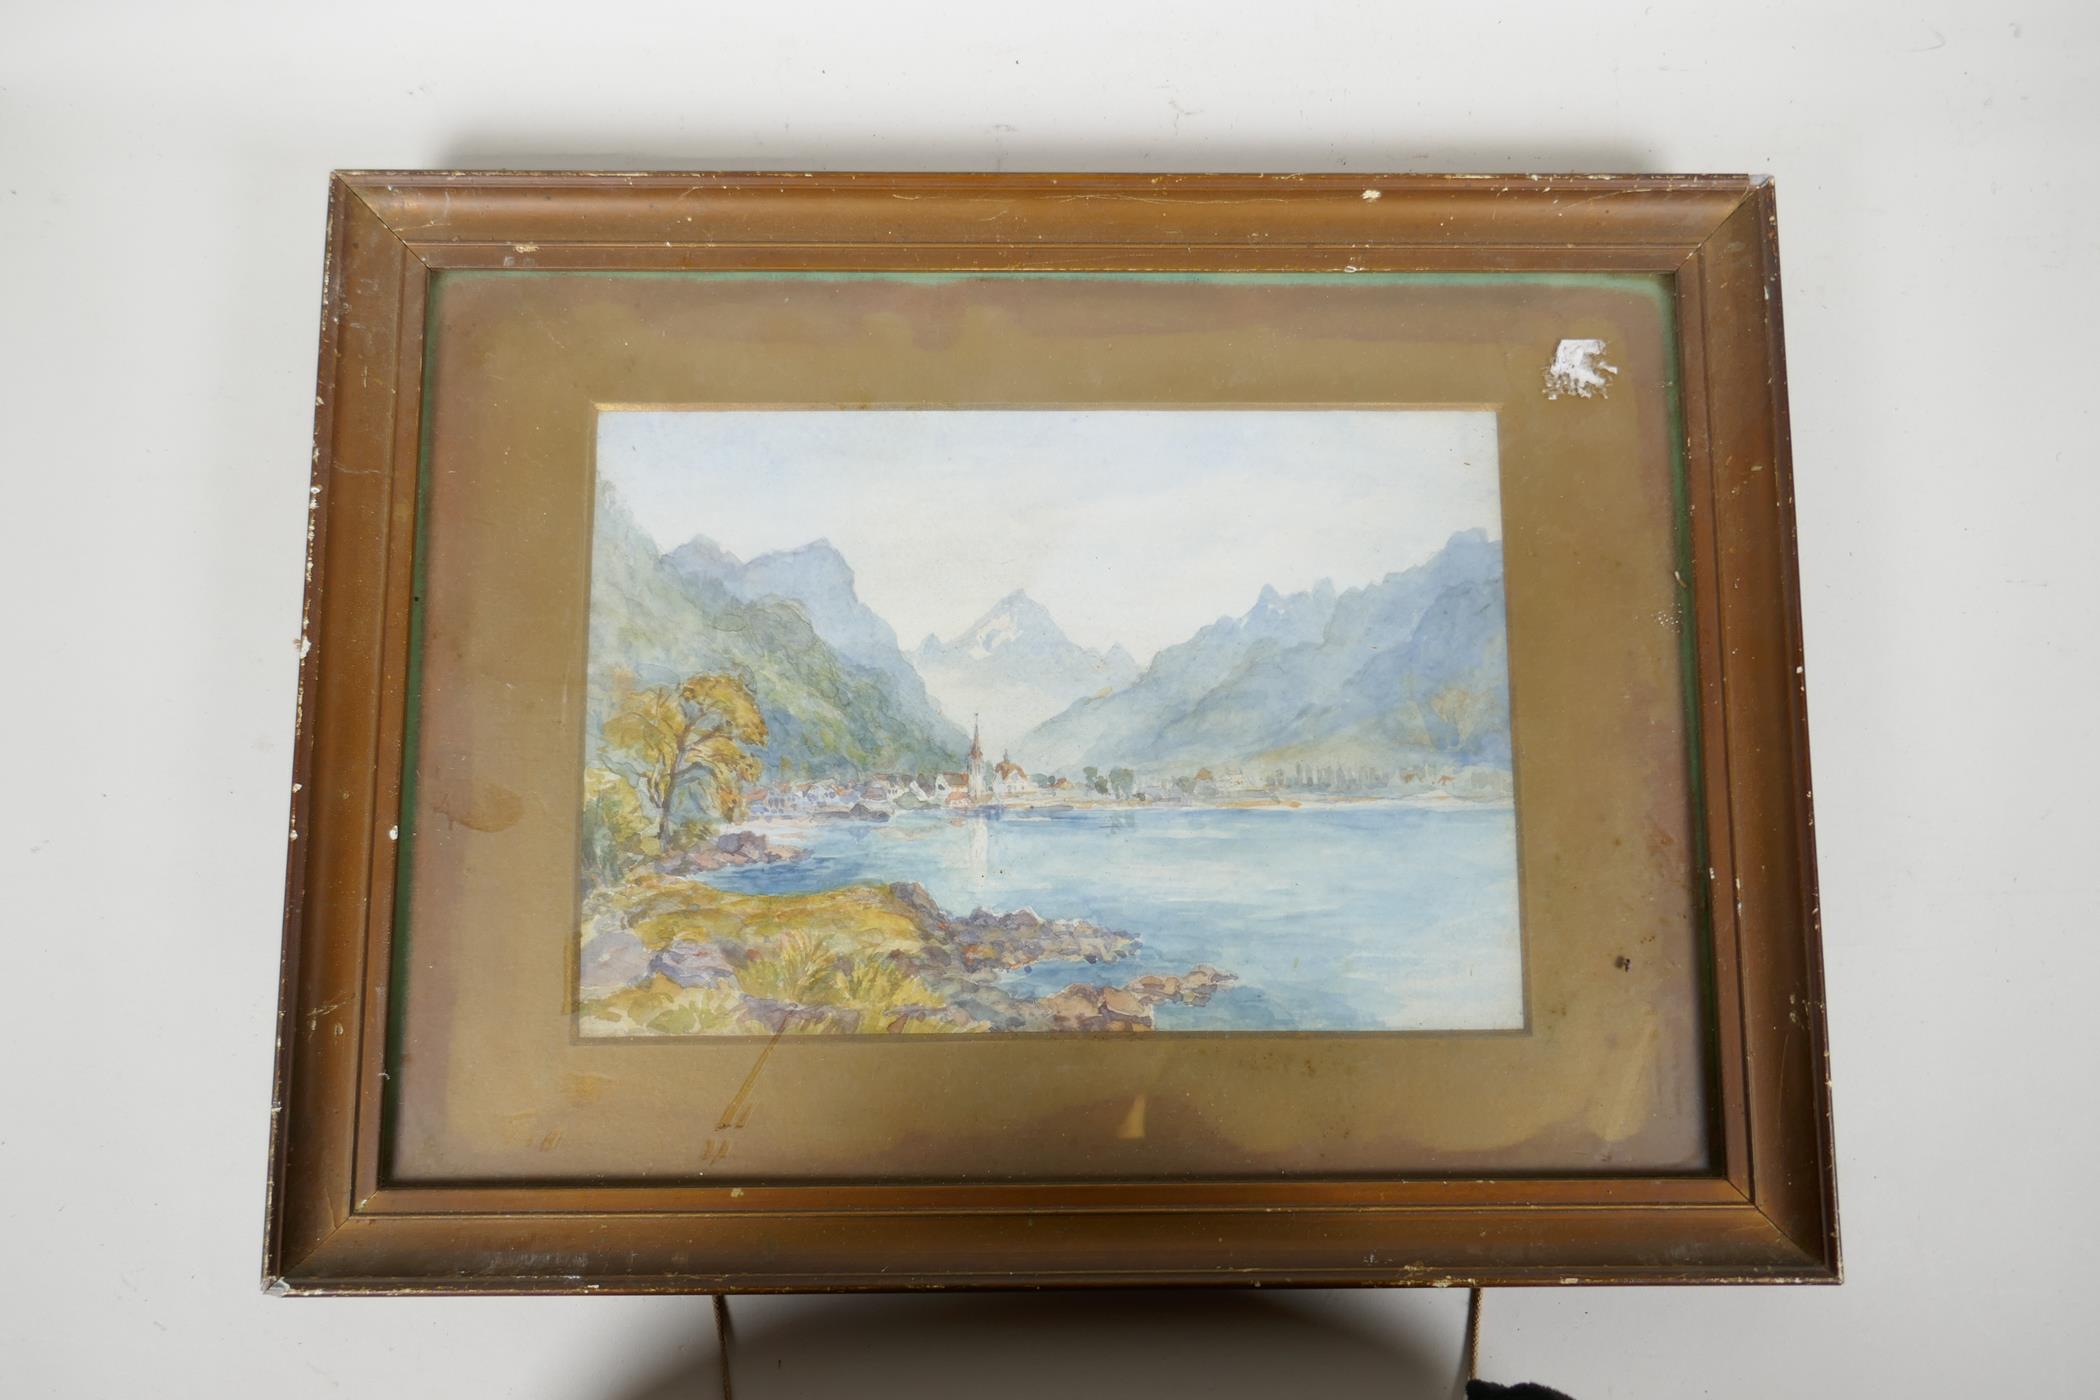 A C19th watercolour of an Italian Swiss lake scene, with distant town & mountains, 10" x 7" - Image 2 of 2